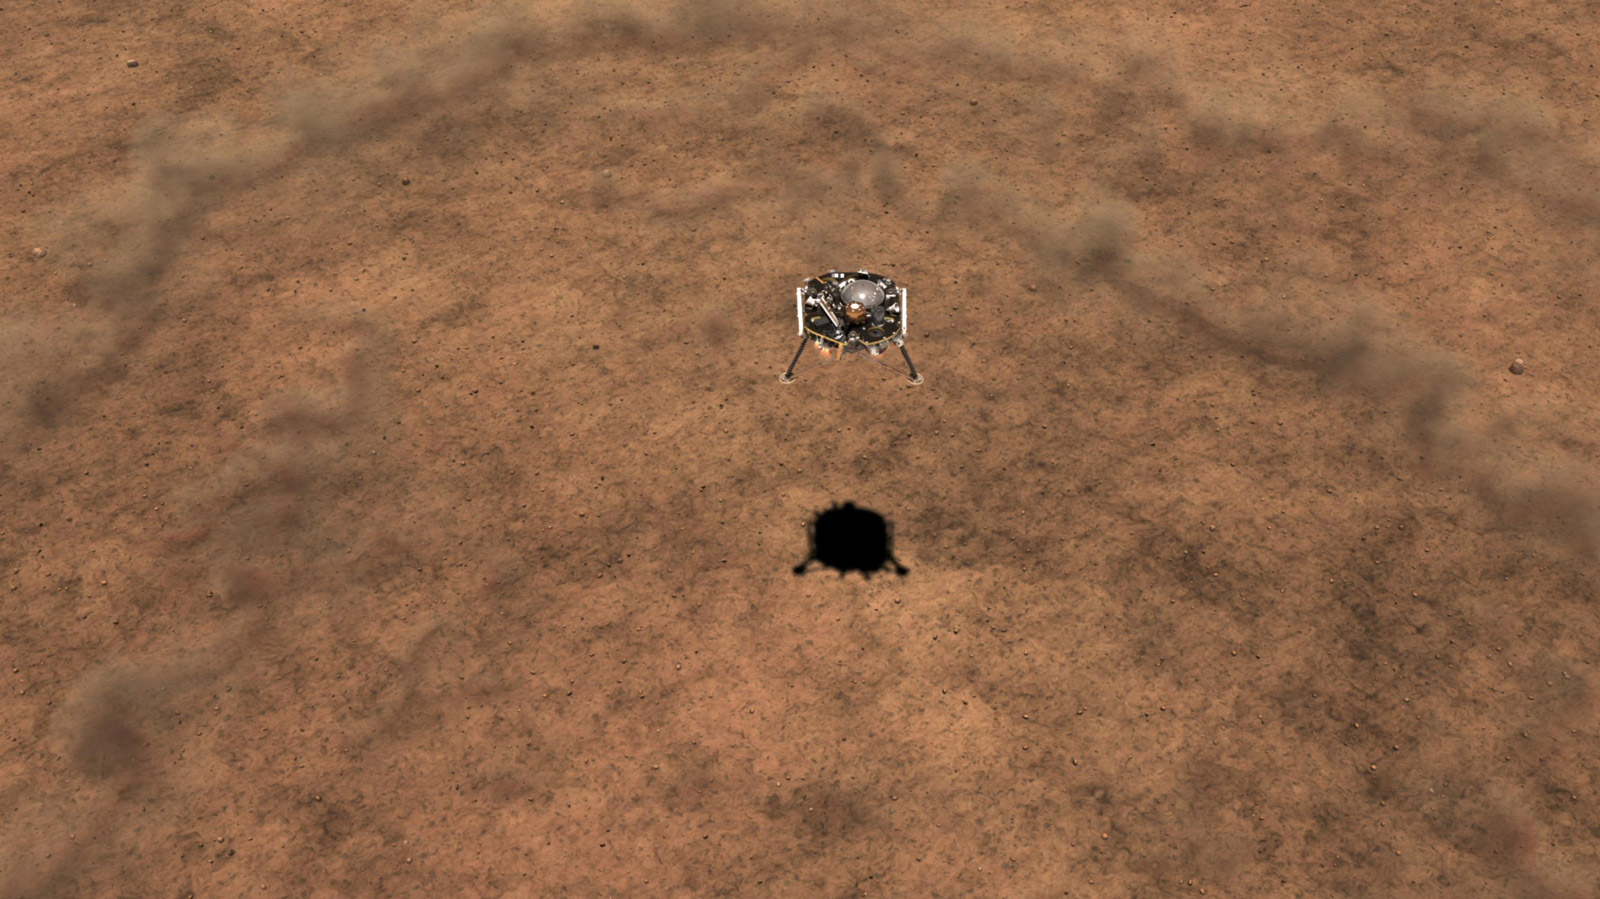 This illustration shows a simulated view of NASA's InSight lander kicking up dust as it lands on the Martian surface.